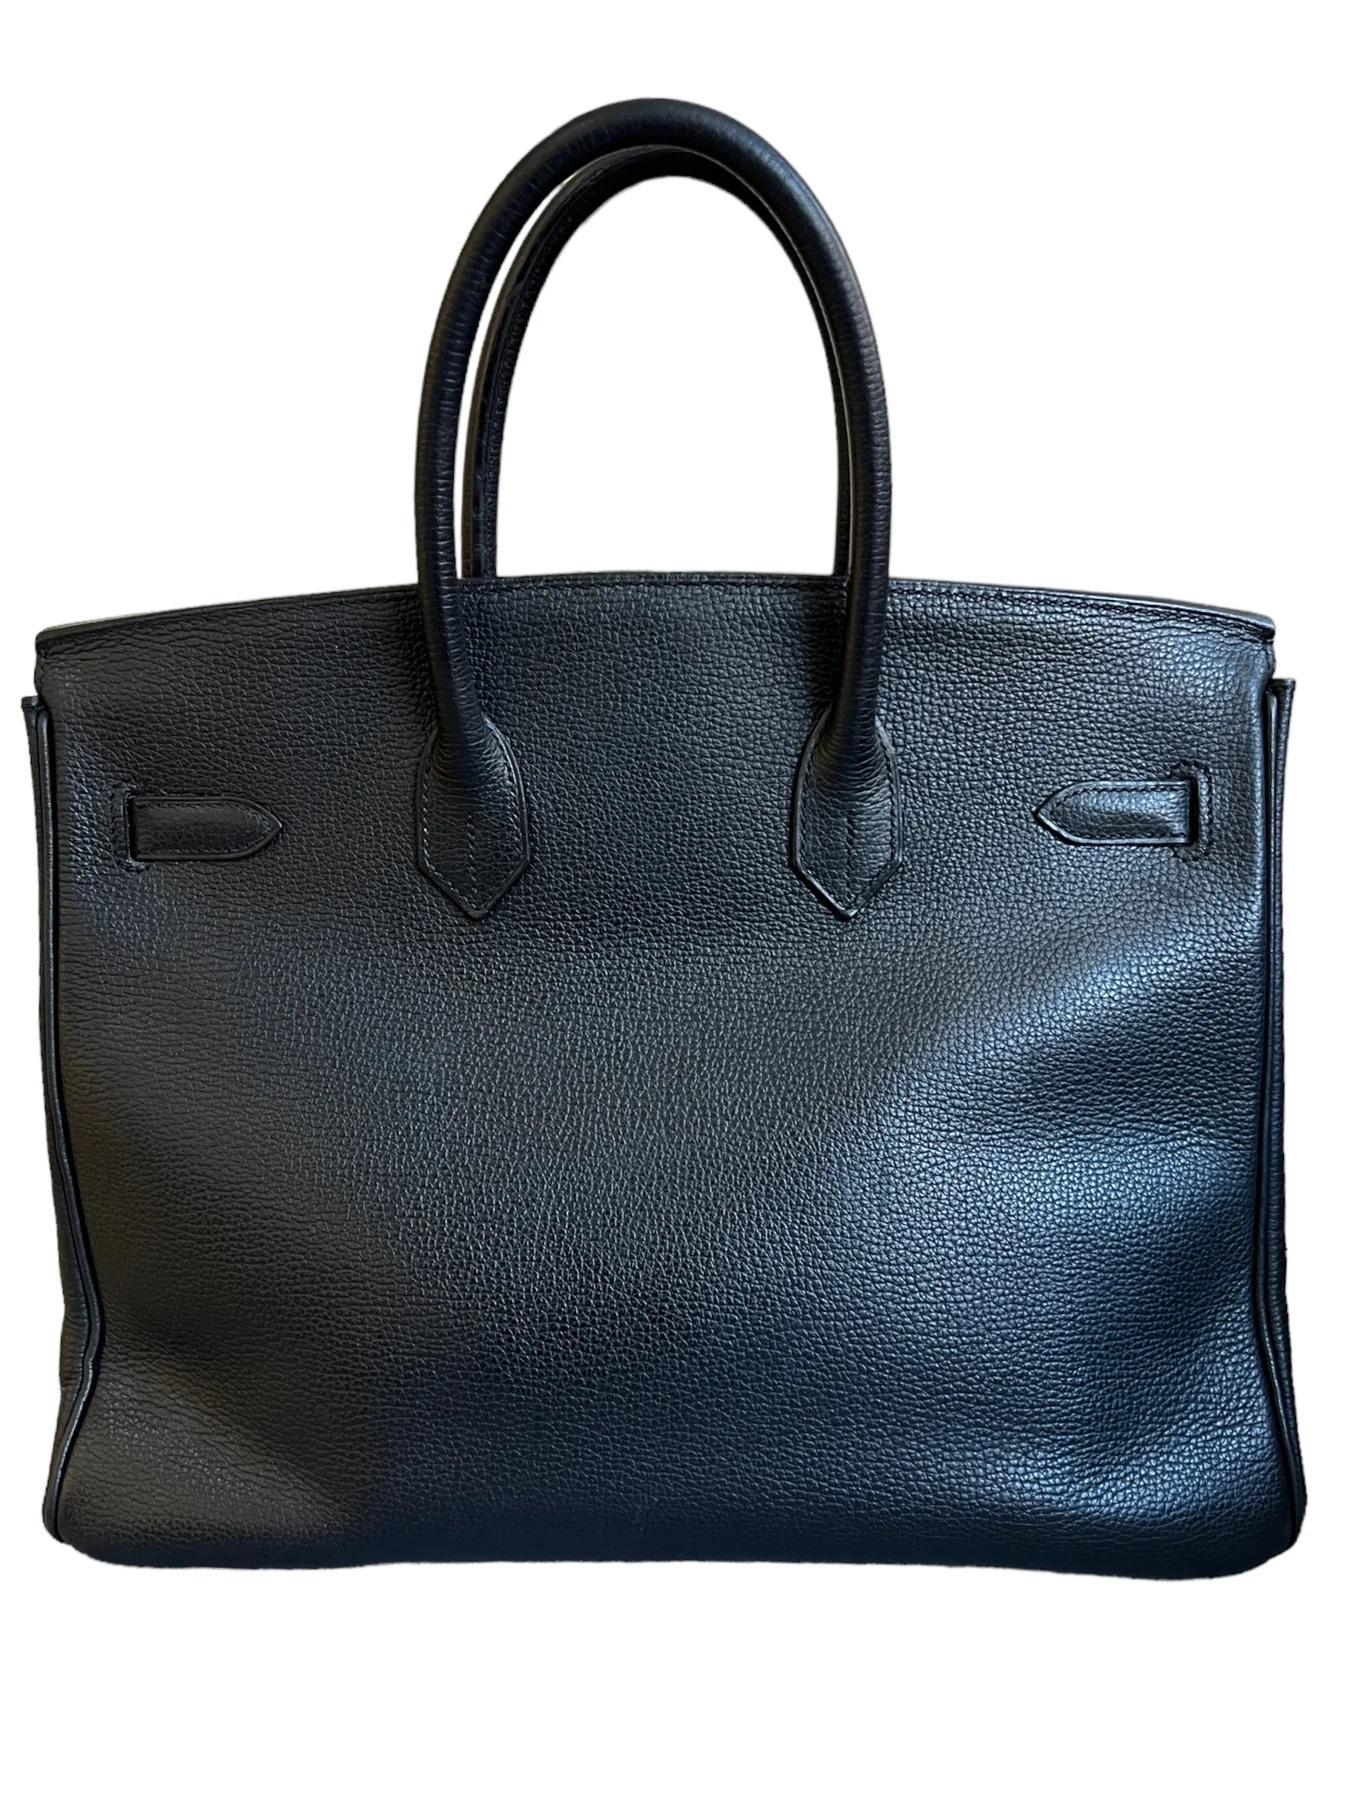 Hermes Birkin 35 Black Vache Liegée leather with Gold Hardware 

This Hermes Birkin 35 is crafted from Black Vache Liegée leather and finished with gold hardware, giving it an instant touch of luxury. Its signature top handles make it easy to carry